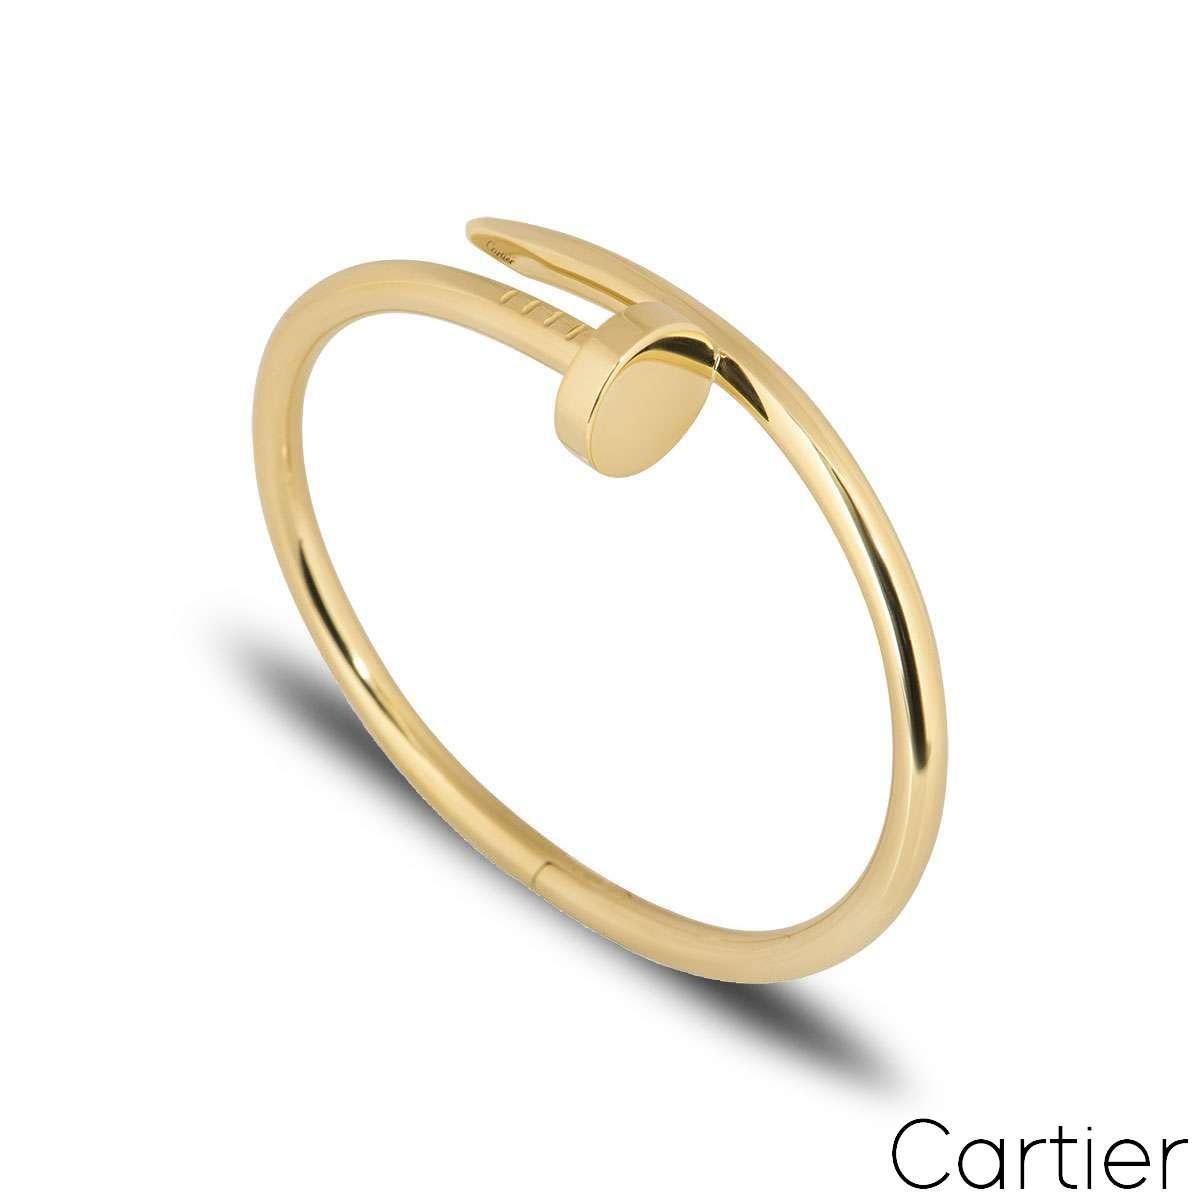 An 18k yellow gold Juste un Clou bracelet from Cartier. The bracelet is wrapped around with a nail head at one end and the end of a nail at the other. A size 16, this bracelet features the new style clasp and has a gross weight of 31.4 grams.

Comes